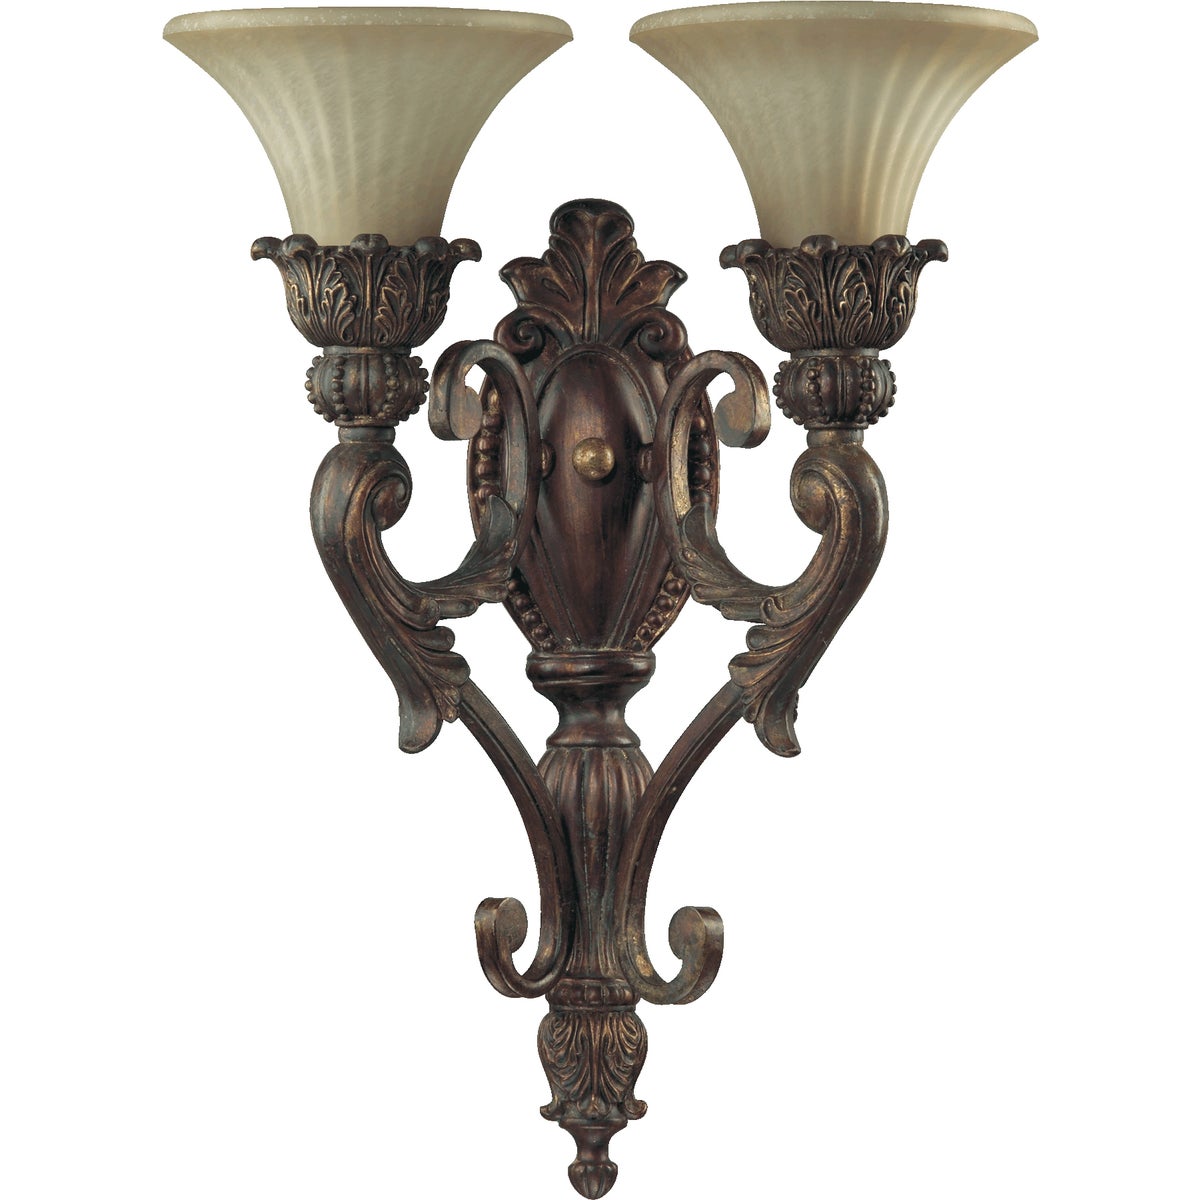 Traditional Wall Sconce with Corsican Gold Finish, featuring a cast structure and ornate wood and bronze detailing. Two shades provide elegant lighting.